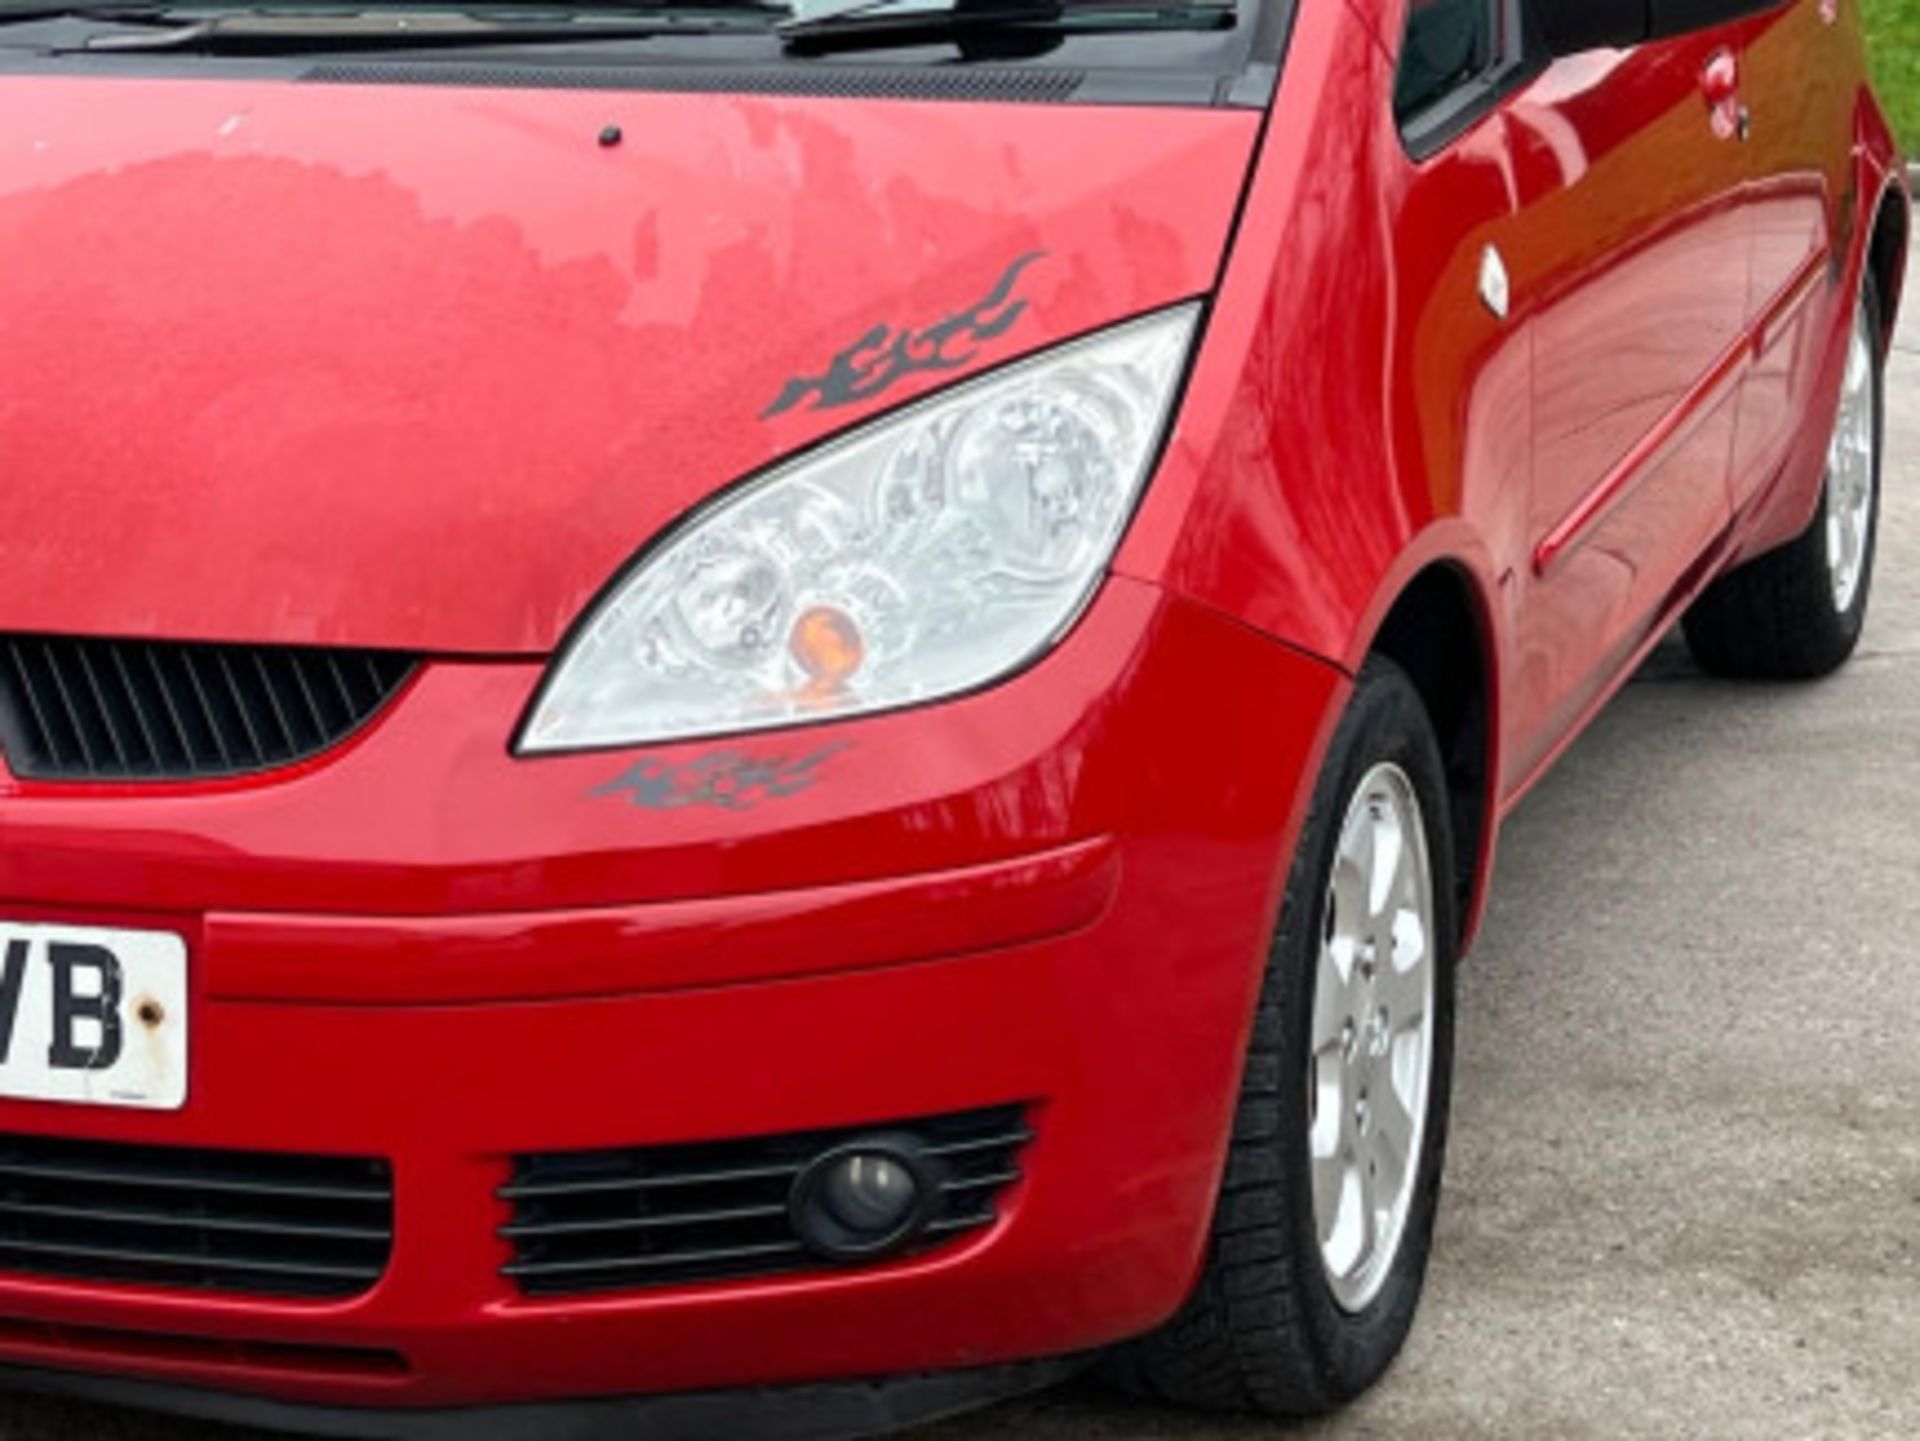 2007 MITSUBISHI COLT 1.5 DI-D DIESEL AUTOMATIC >>--NO VAT ON HAMMER--<< - Image 76 of 191